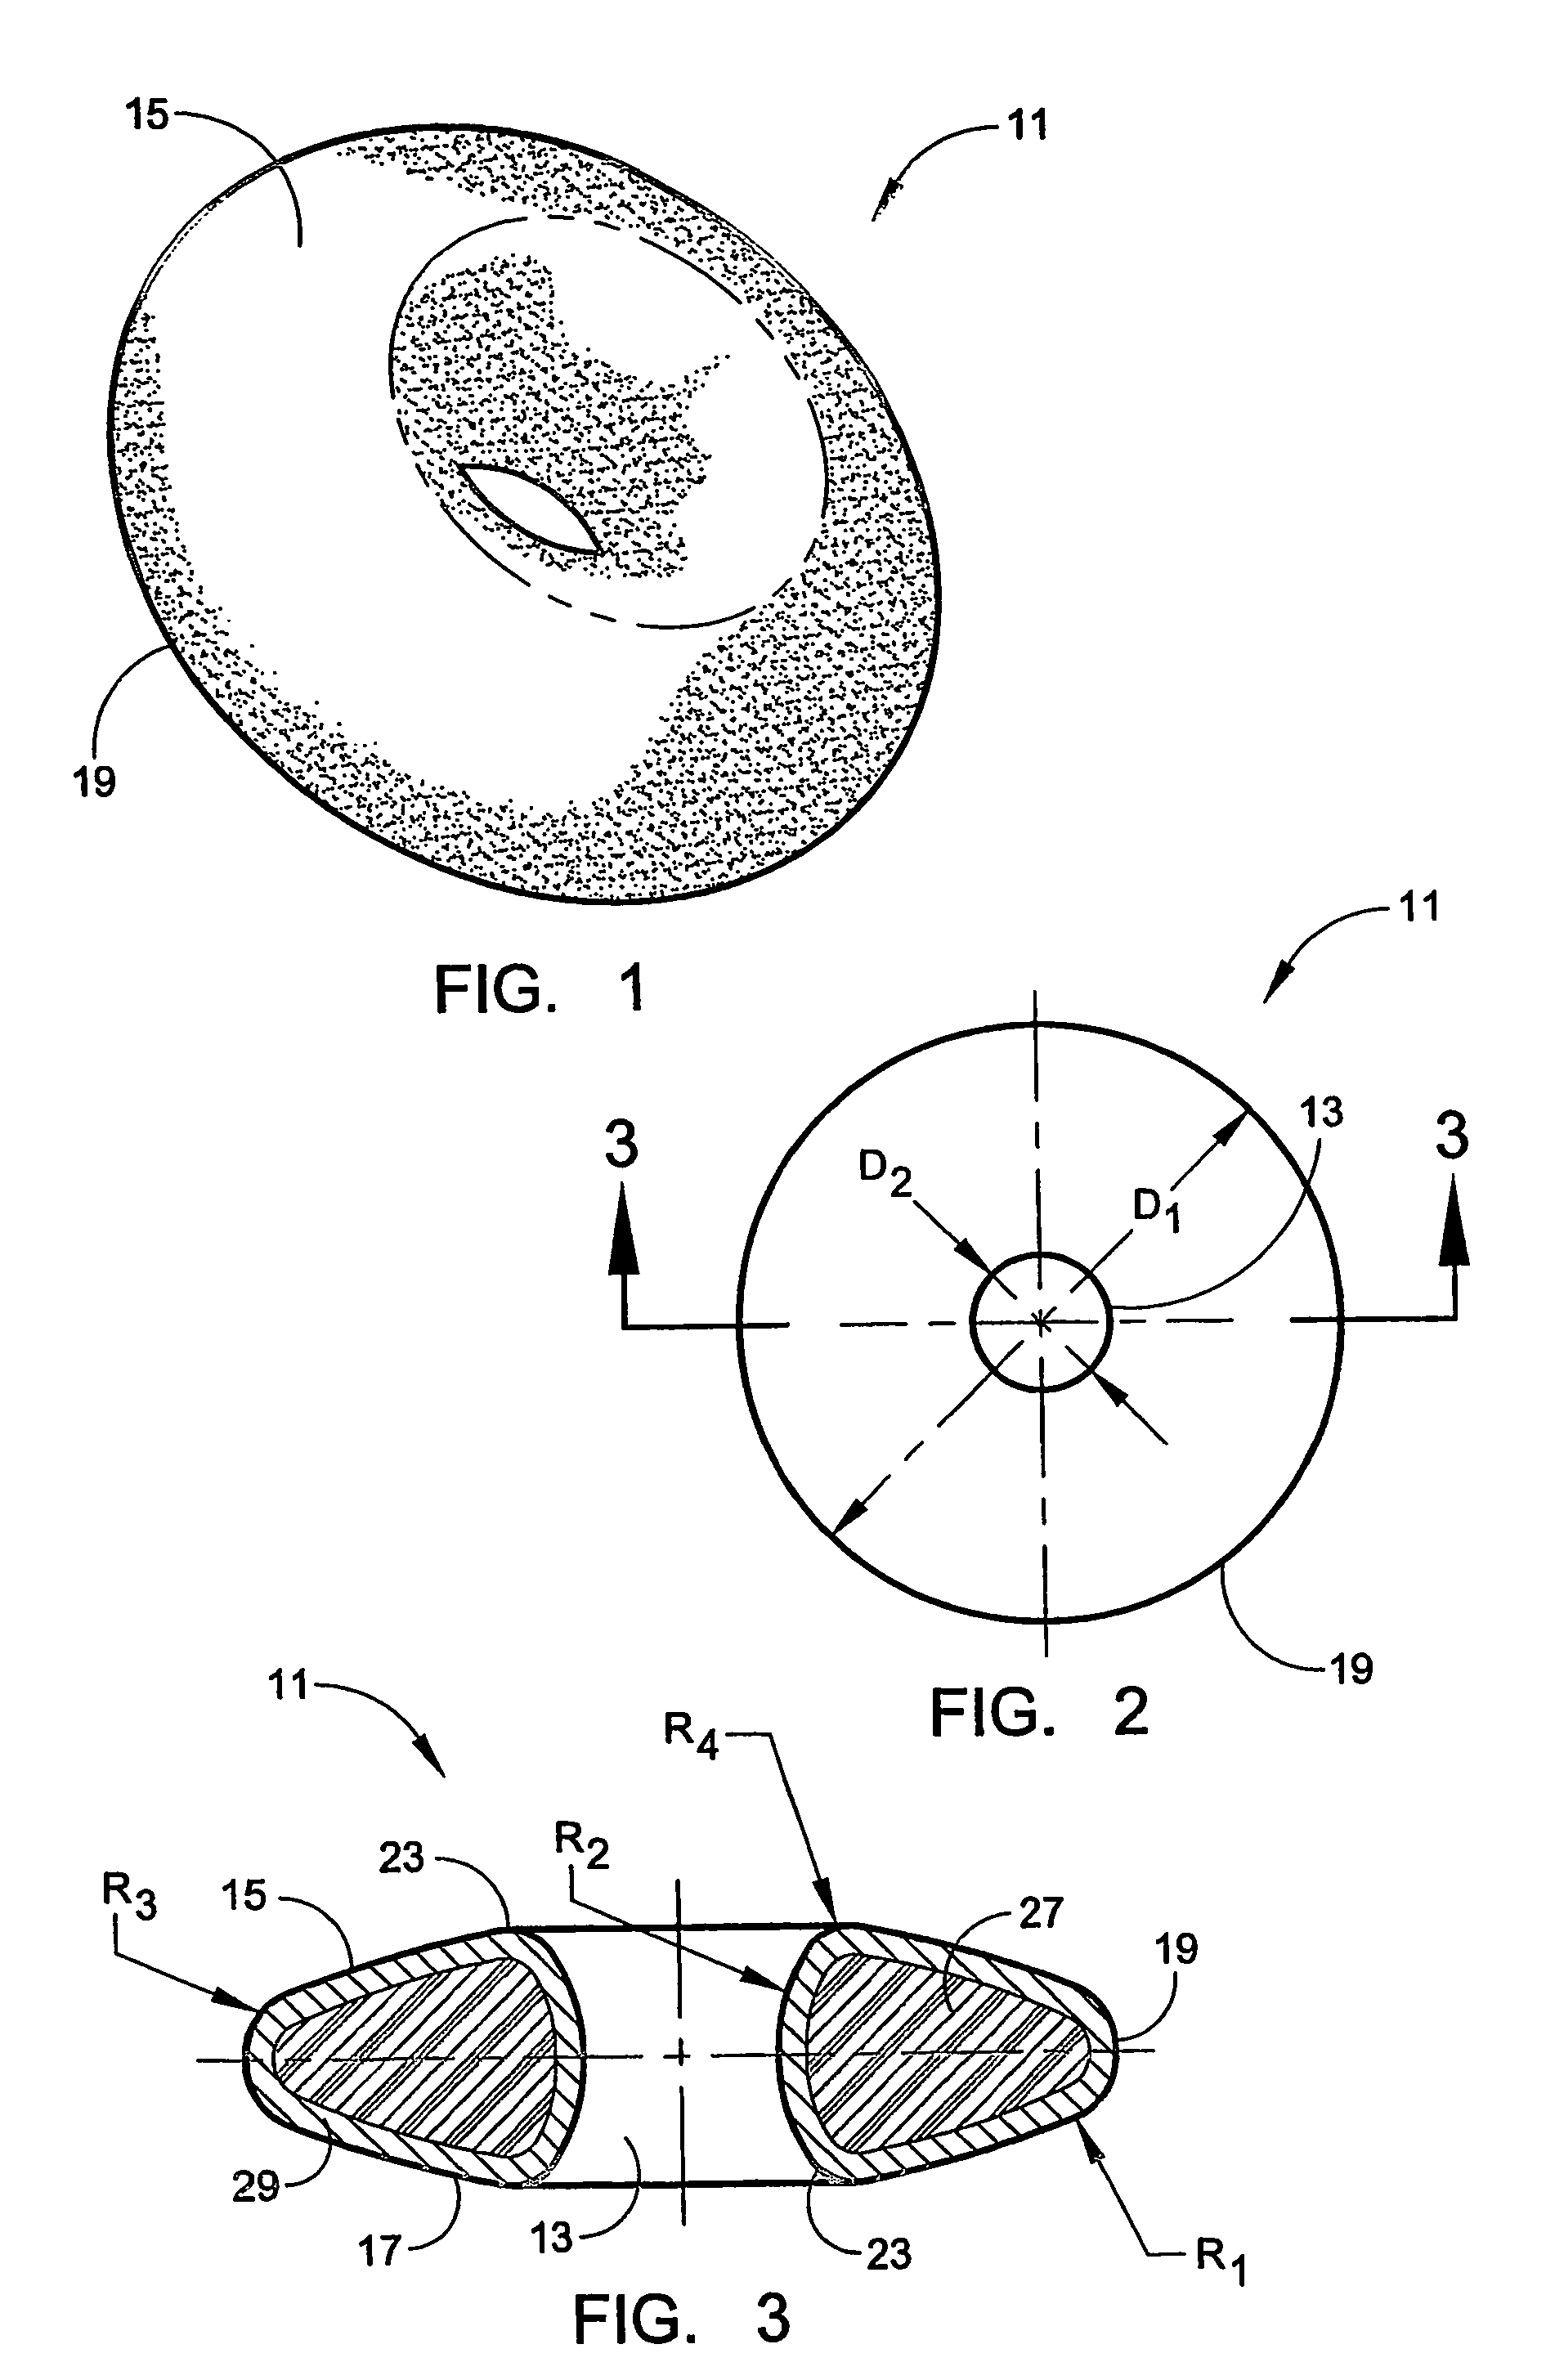 Interpositional biarticular disk implant